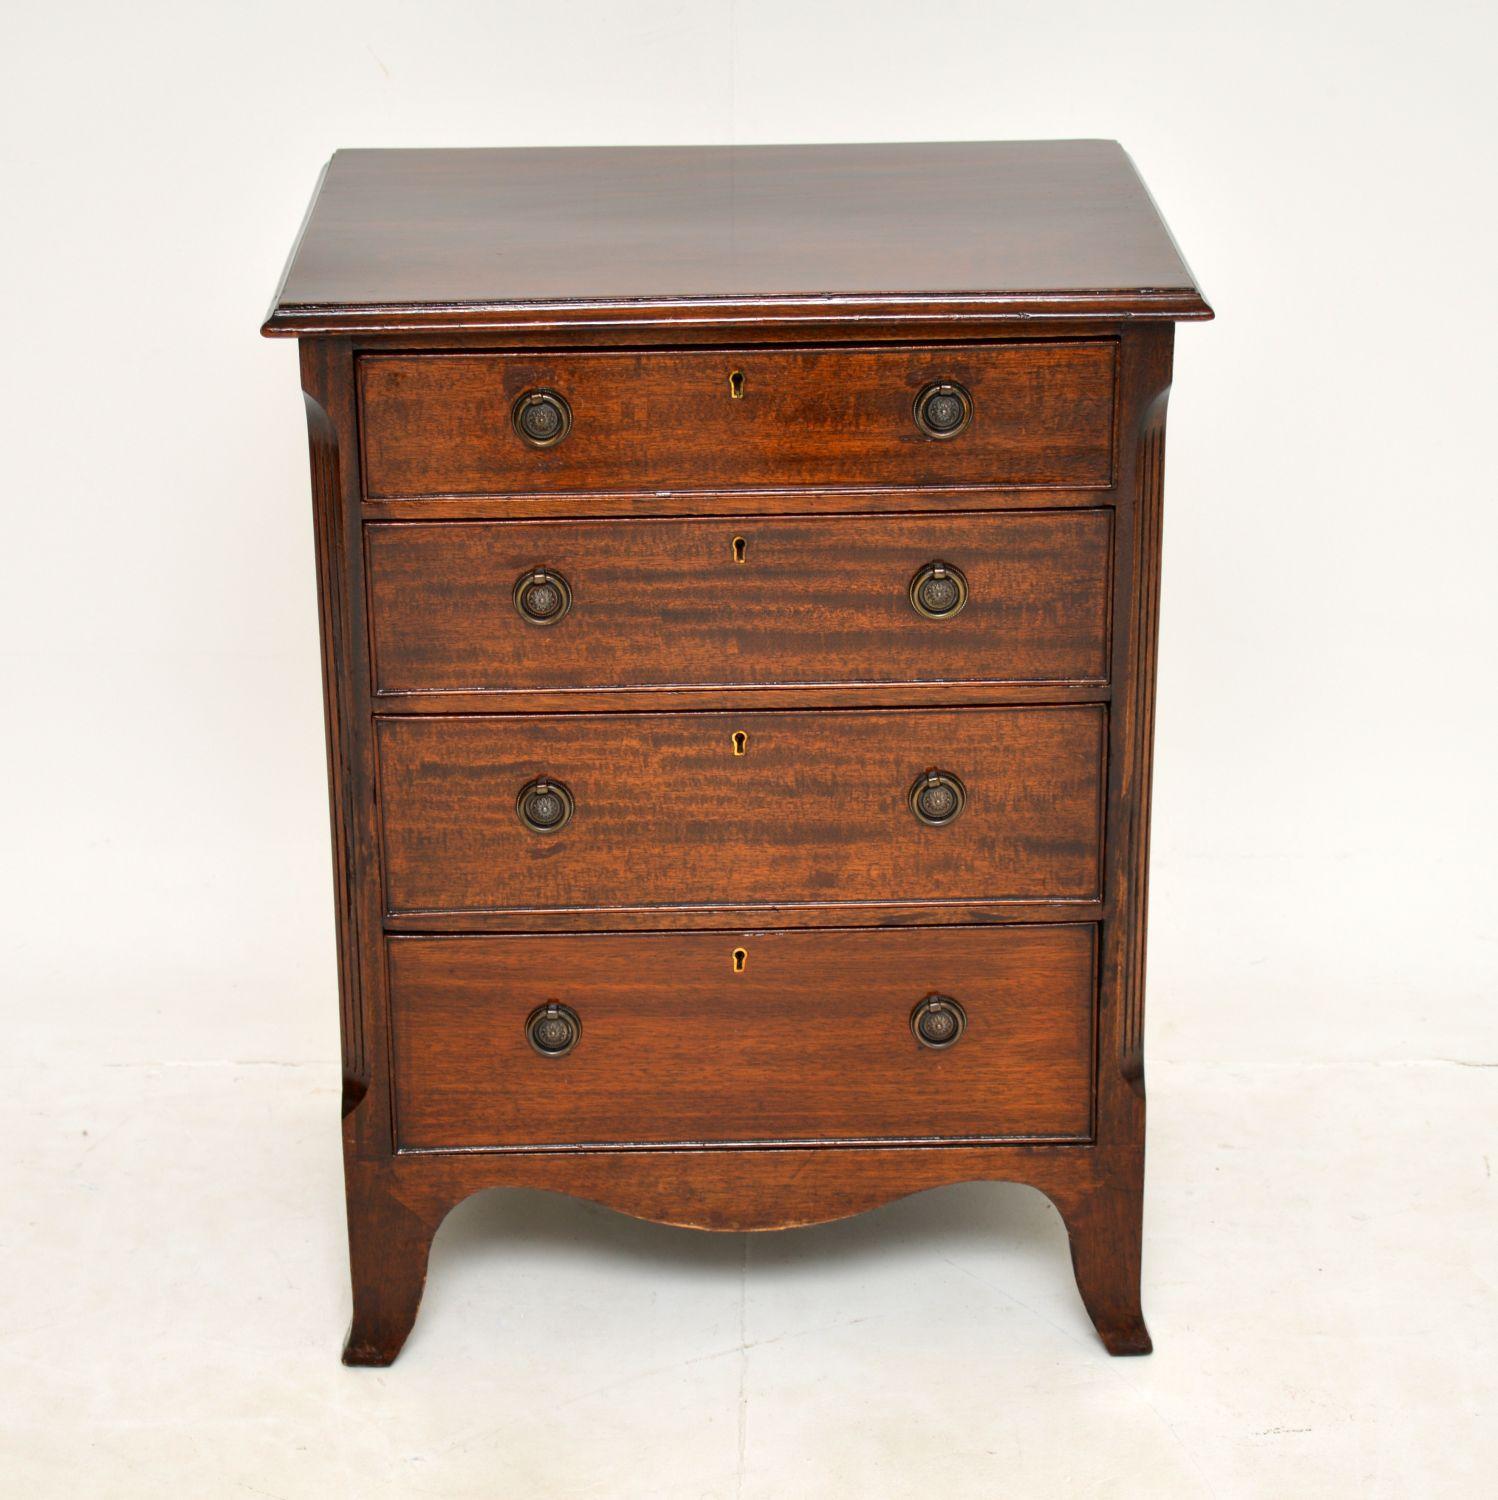 A lovely antique Edwardian chest of drawers. This was made in England, it dates from around the 1900-1910 period.
This is beautifully made and of excellent quality. It is a useful size, small to medium, with lots of storage space. It sits on